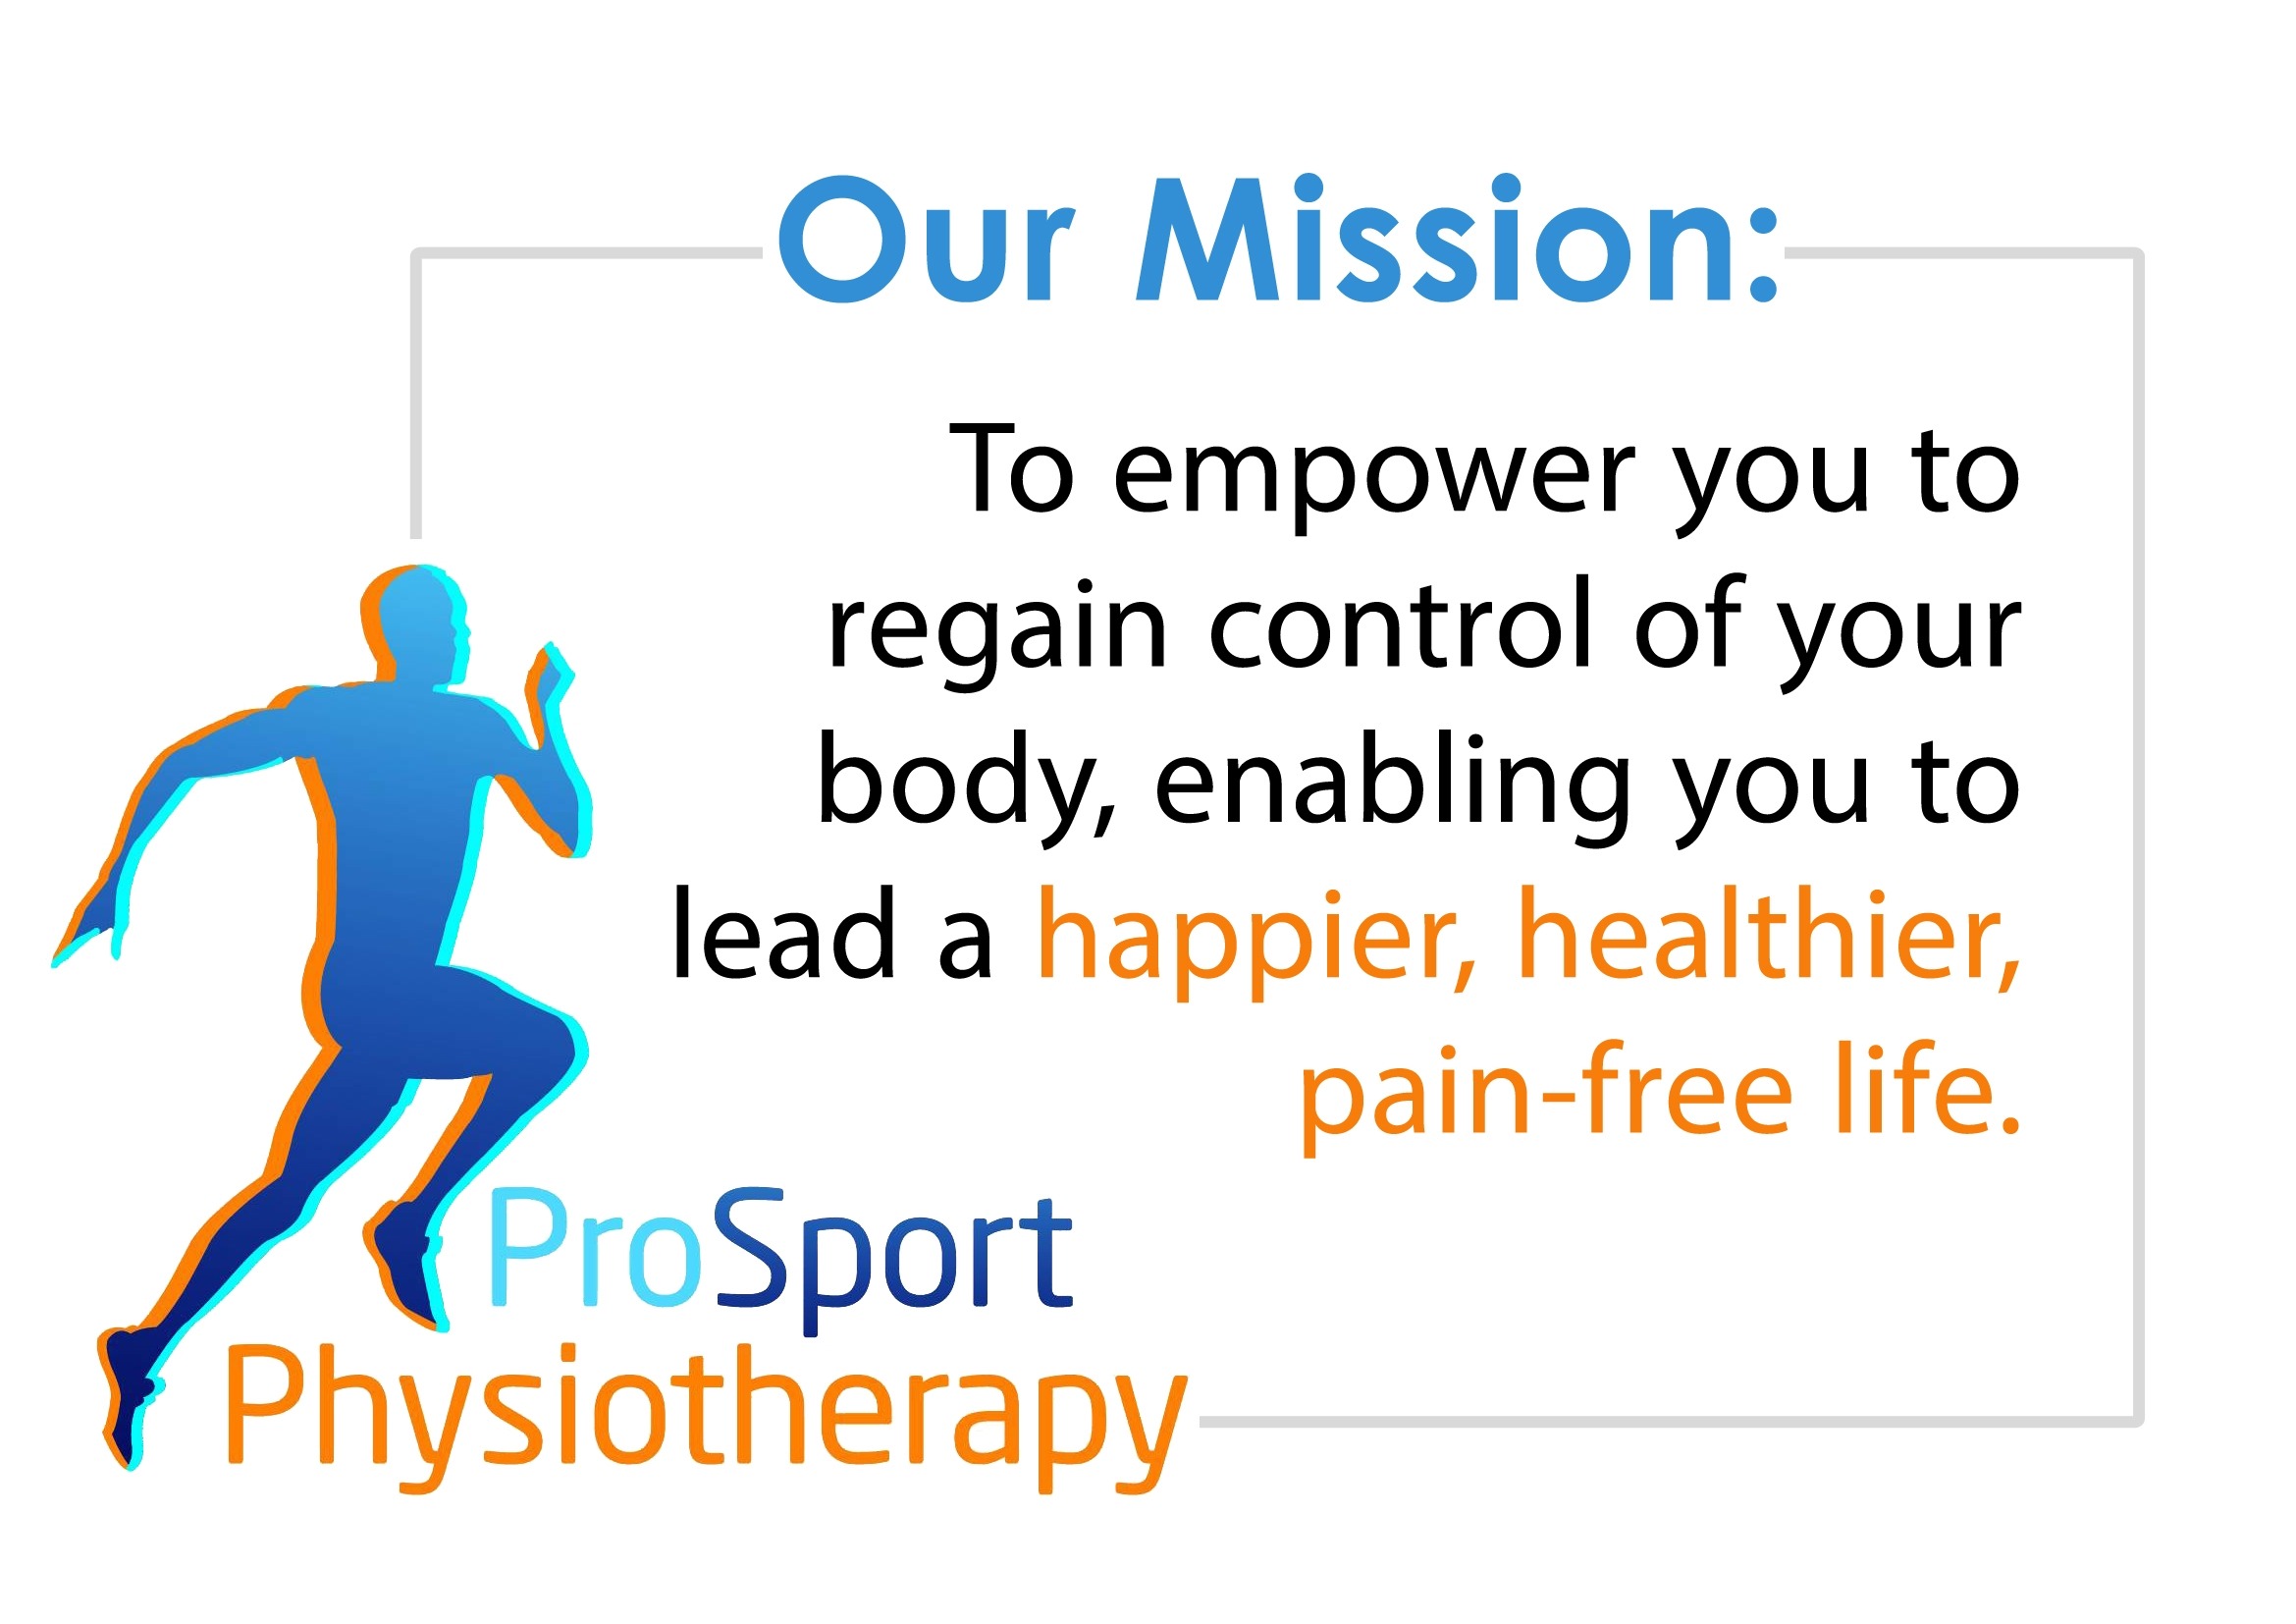 Pro Sport Physiotherapy mission to help relief pain across Huddersfield and the World